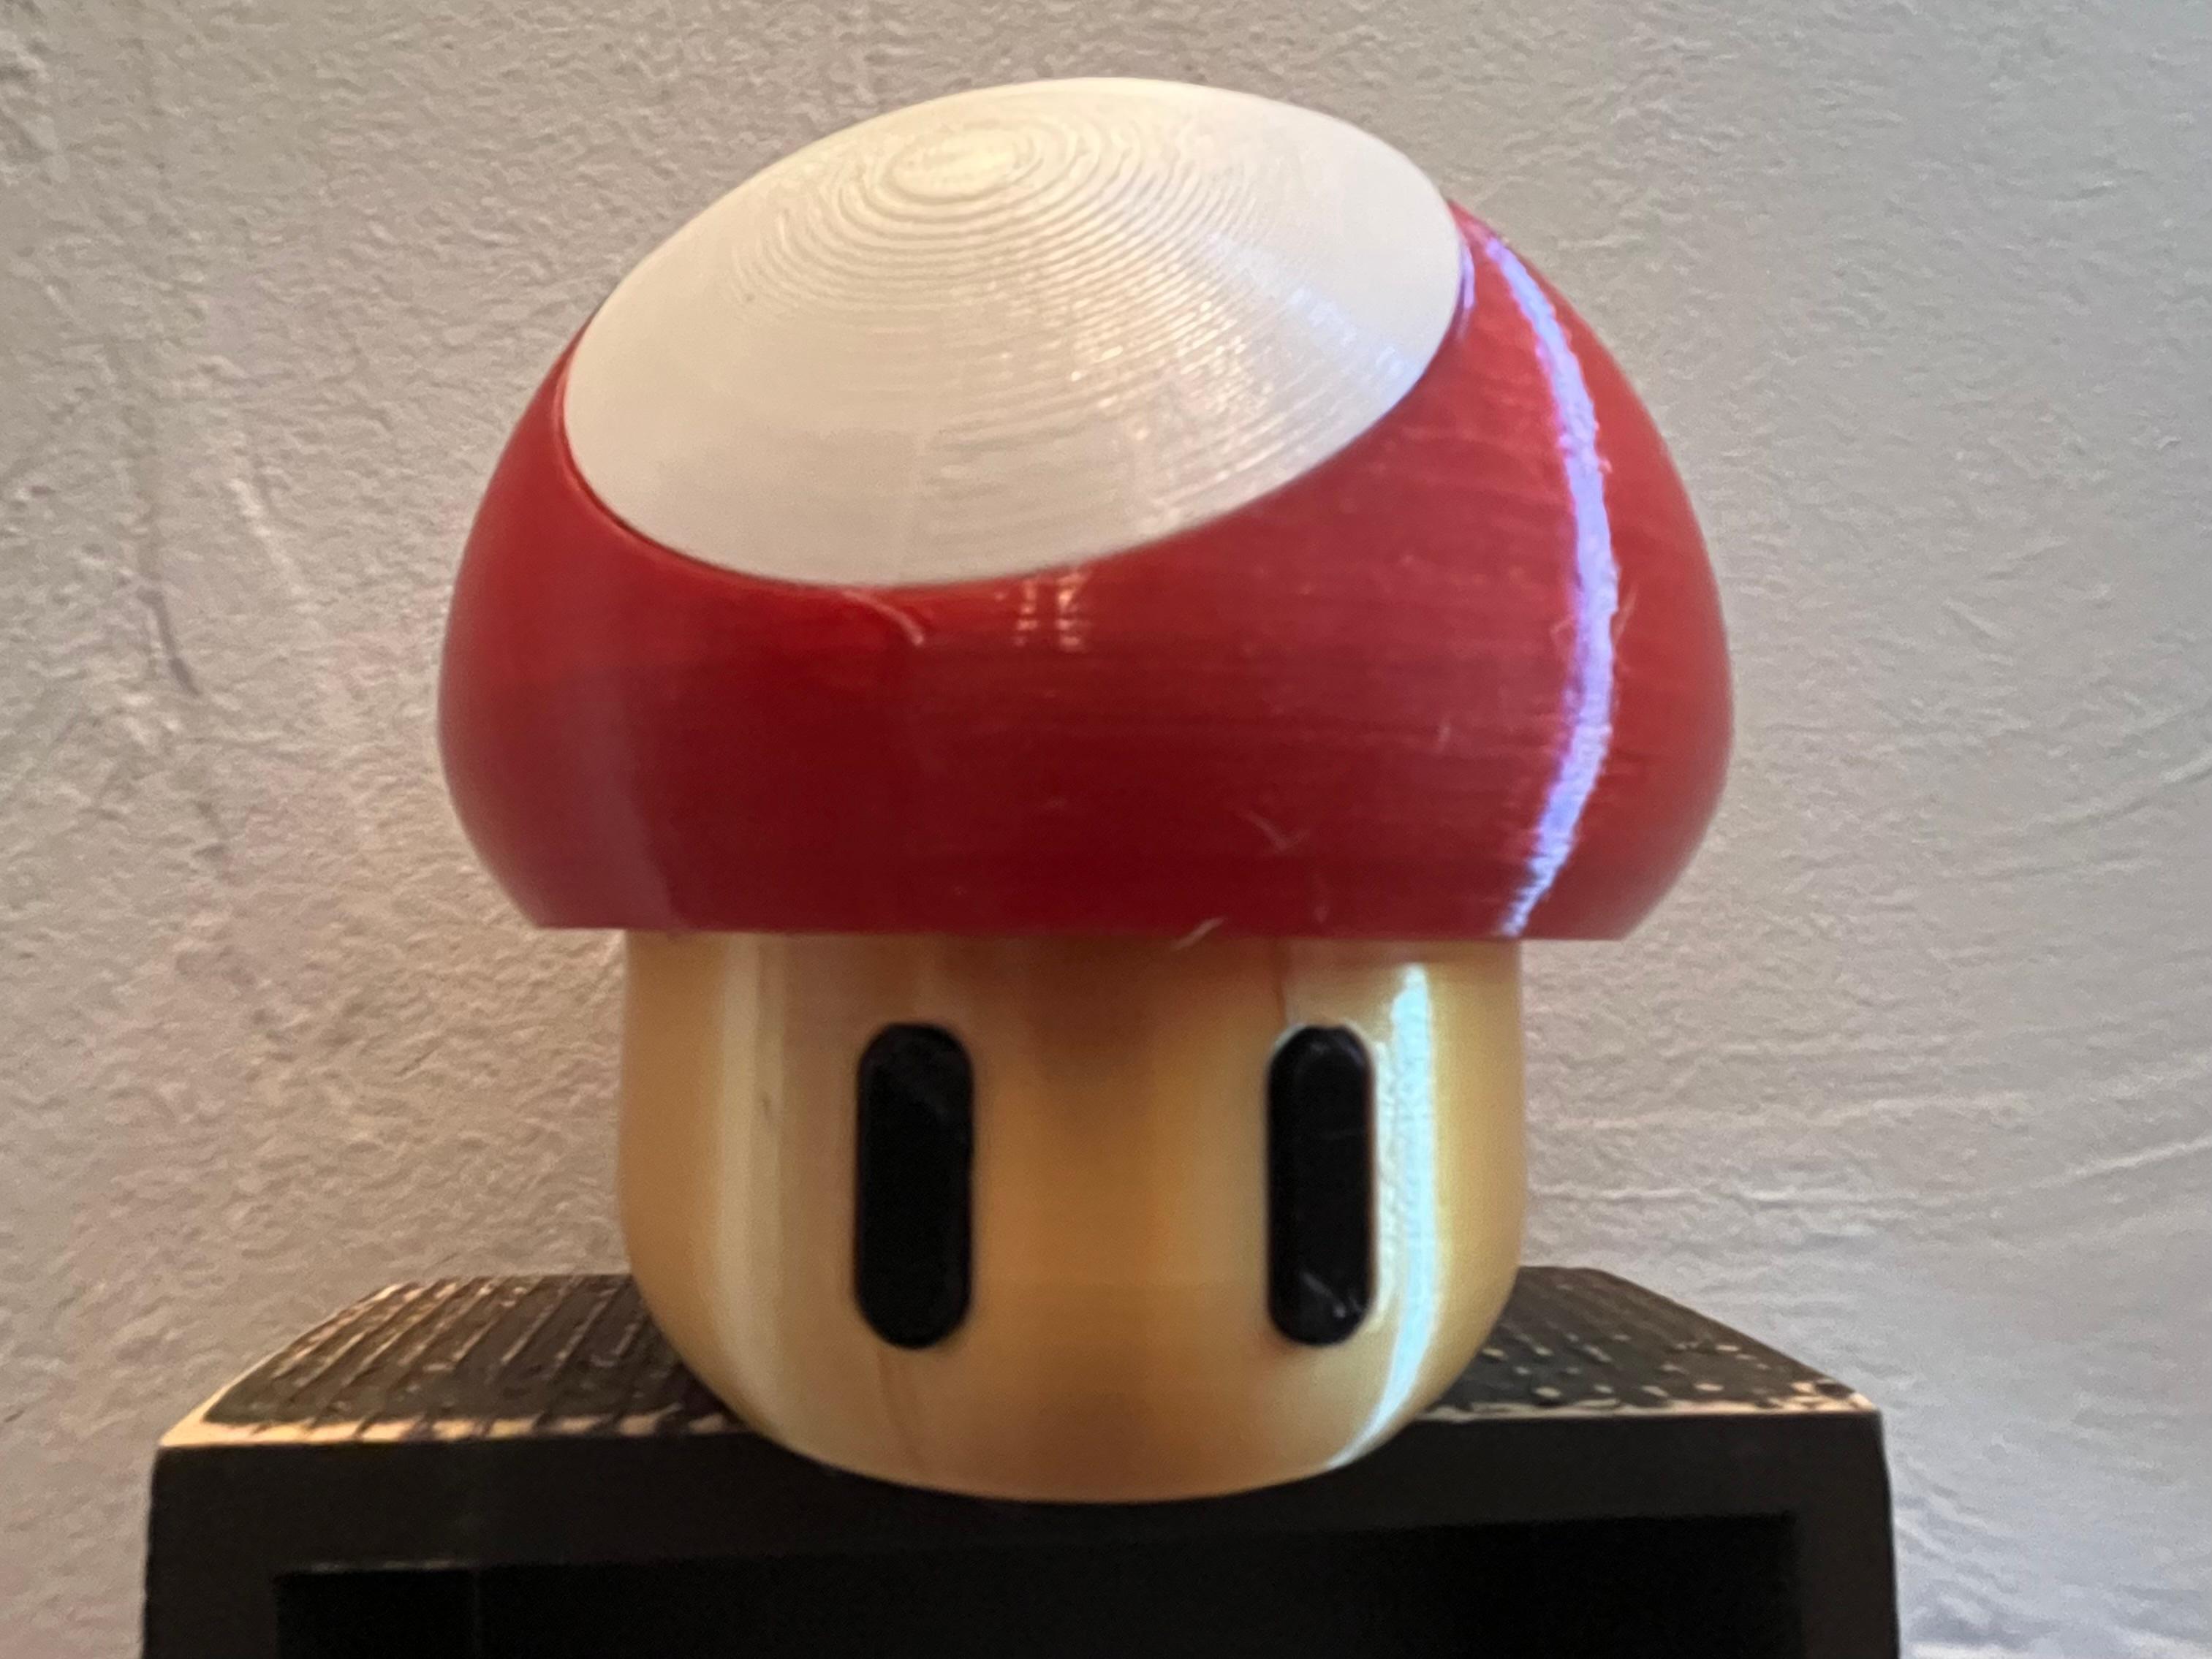 Simple Twist Open Mushroom - Color is a little off on the stem, but it's a great model. I'd recommend moving the seam to the rear on the top and bottom otherwise it appears on the front because the eyes are the only detail on the bottom. - 3d model